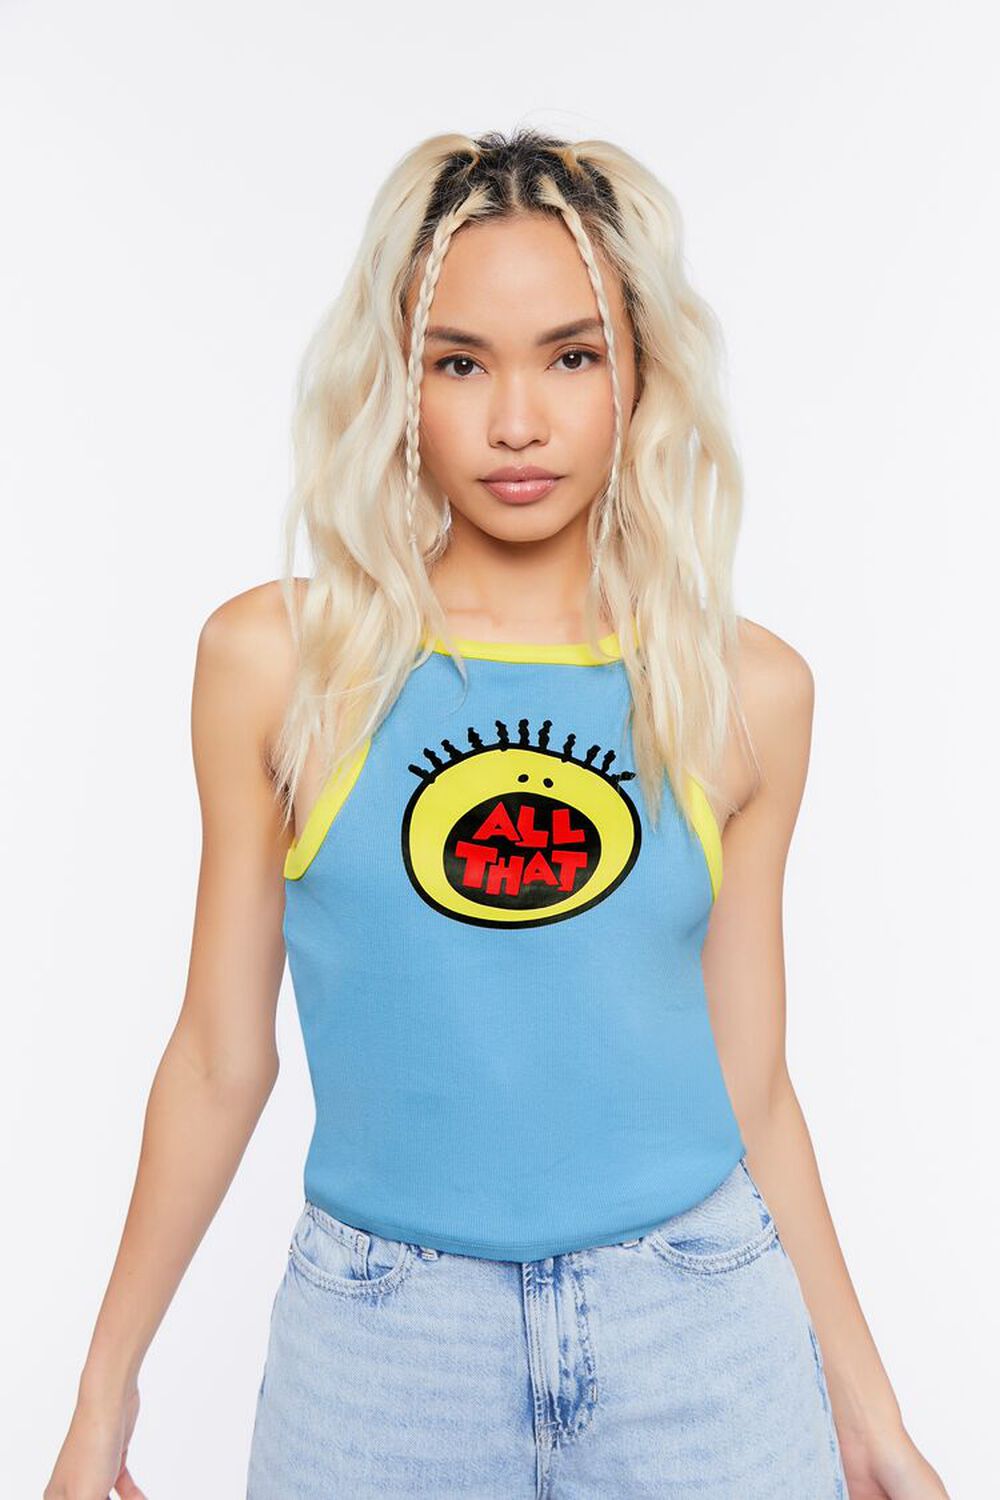 BLUE/MULTI All That Graphic Tank Top, image 1